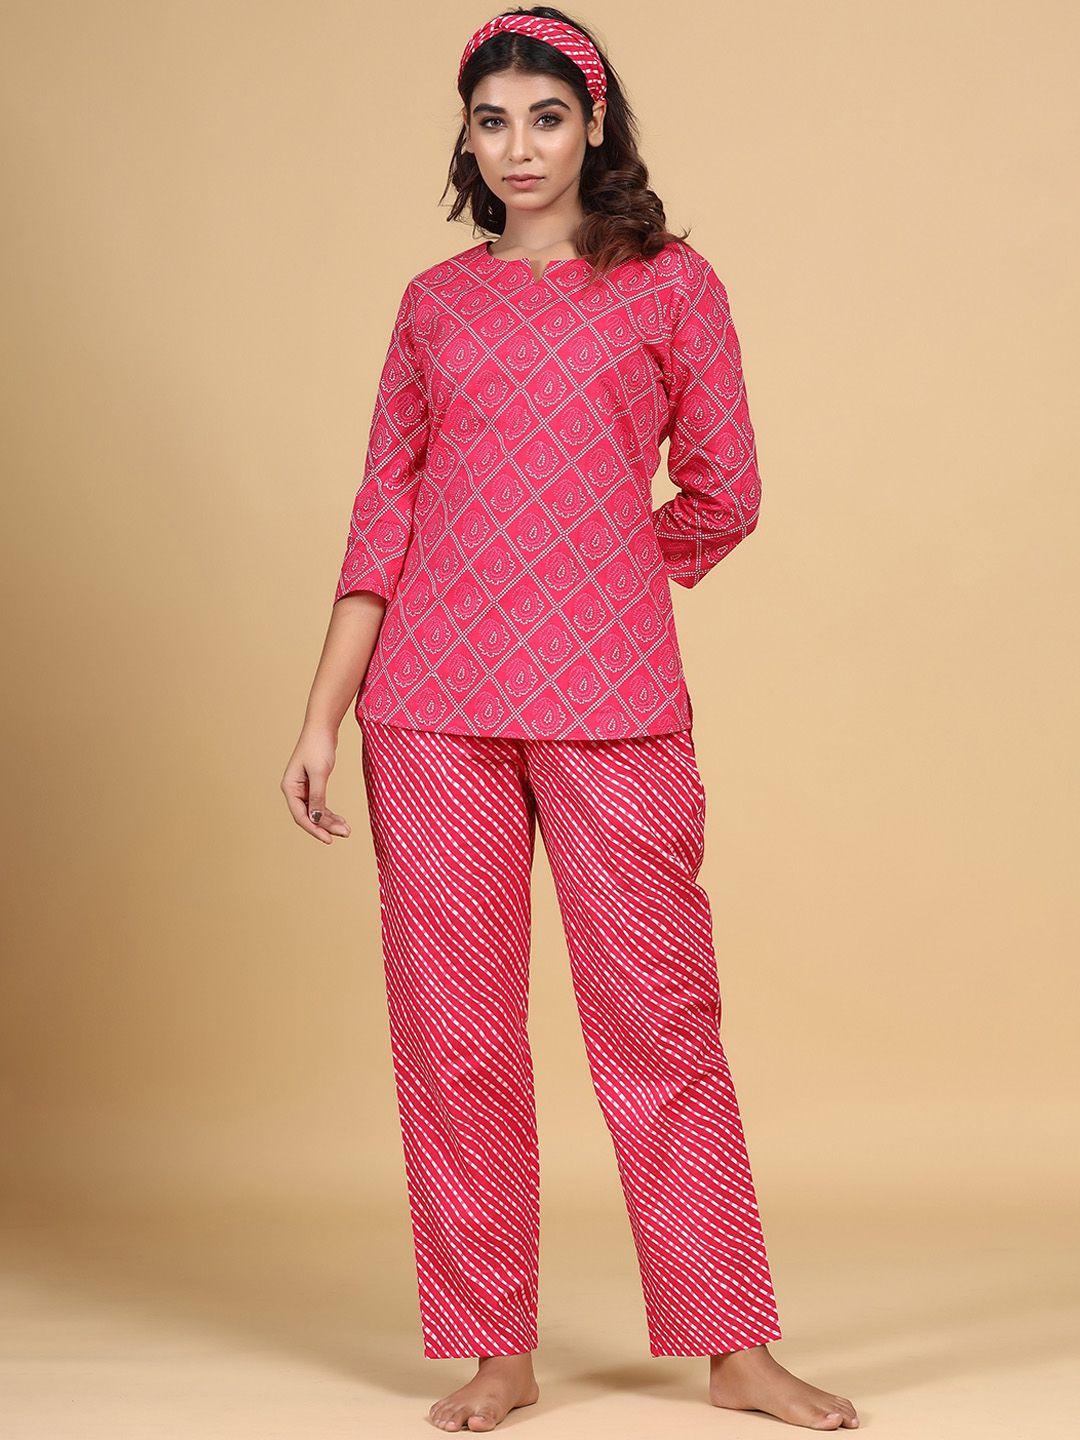 sangria pink & white ethnic motifs printed pure cotton top with trouser